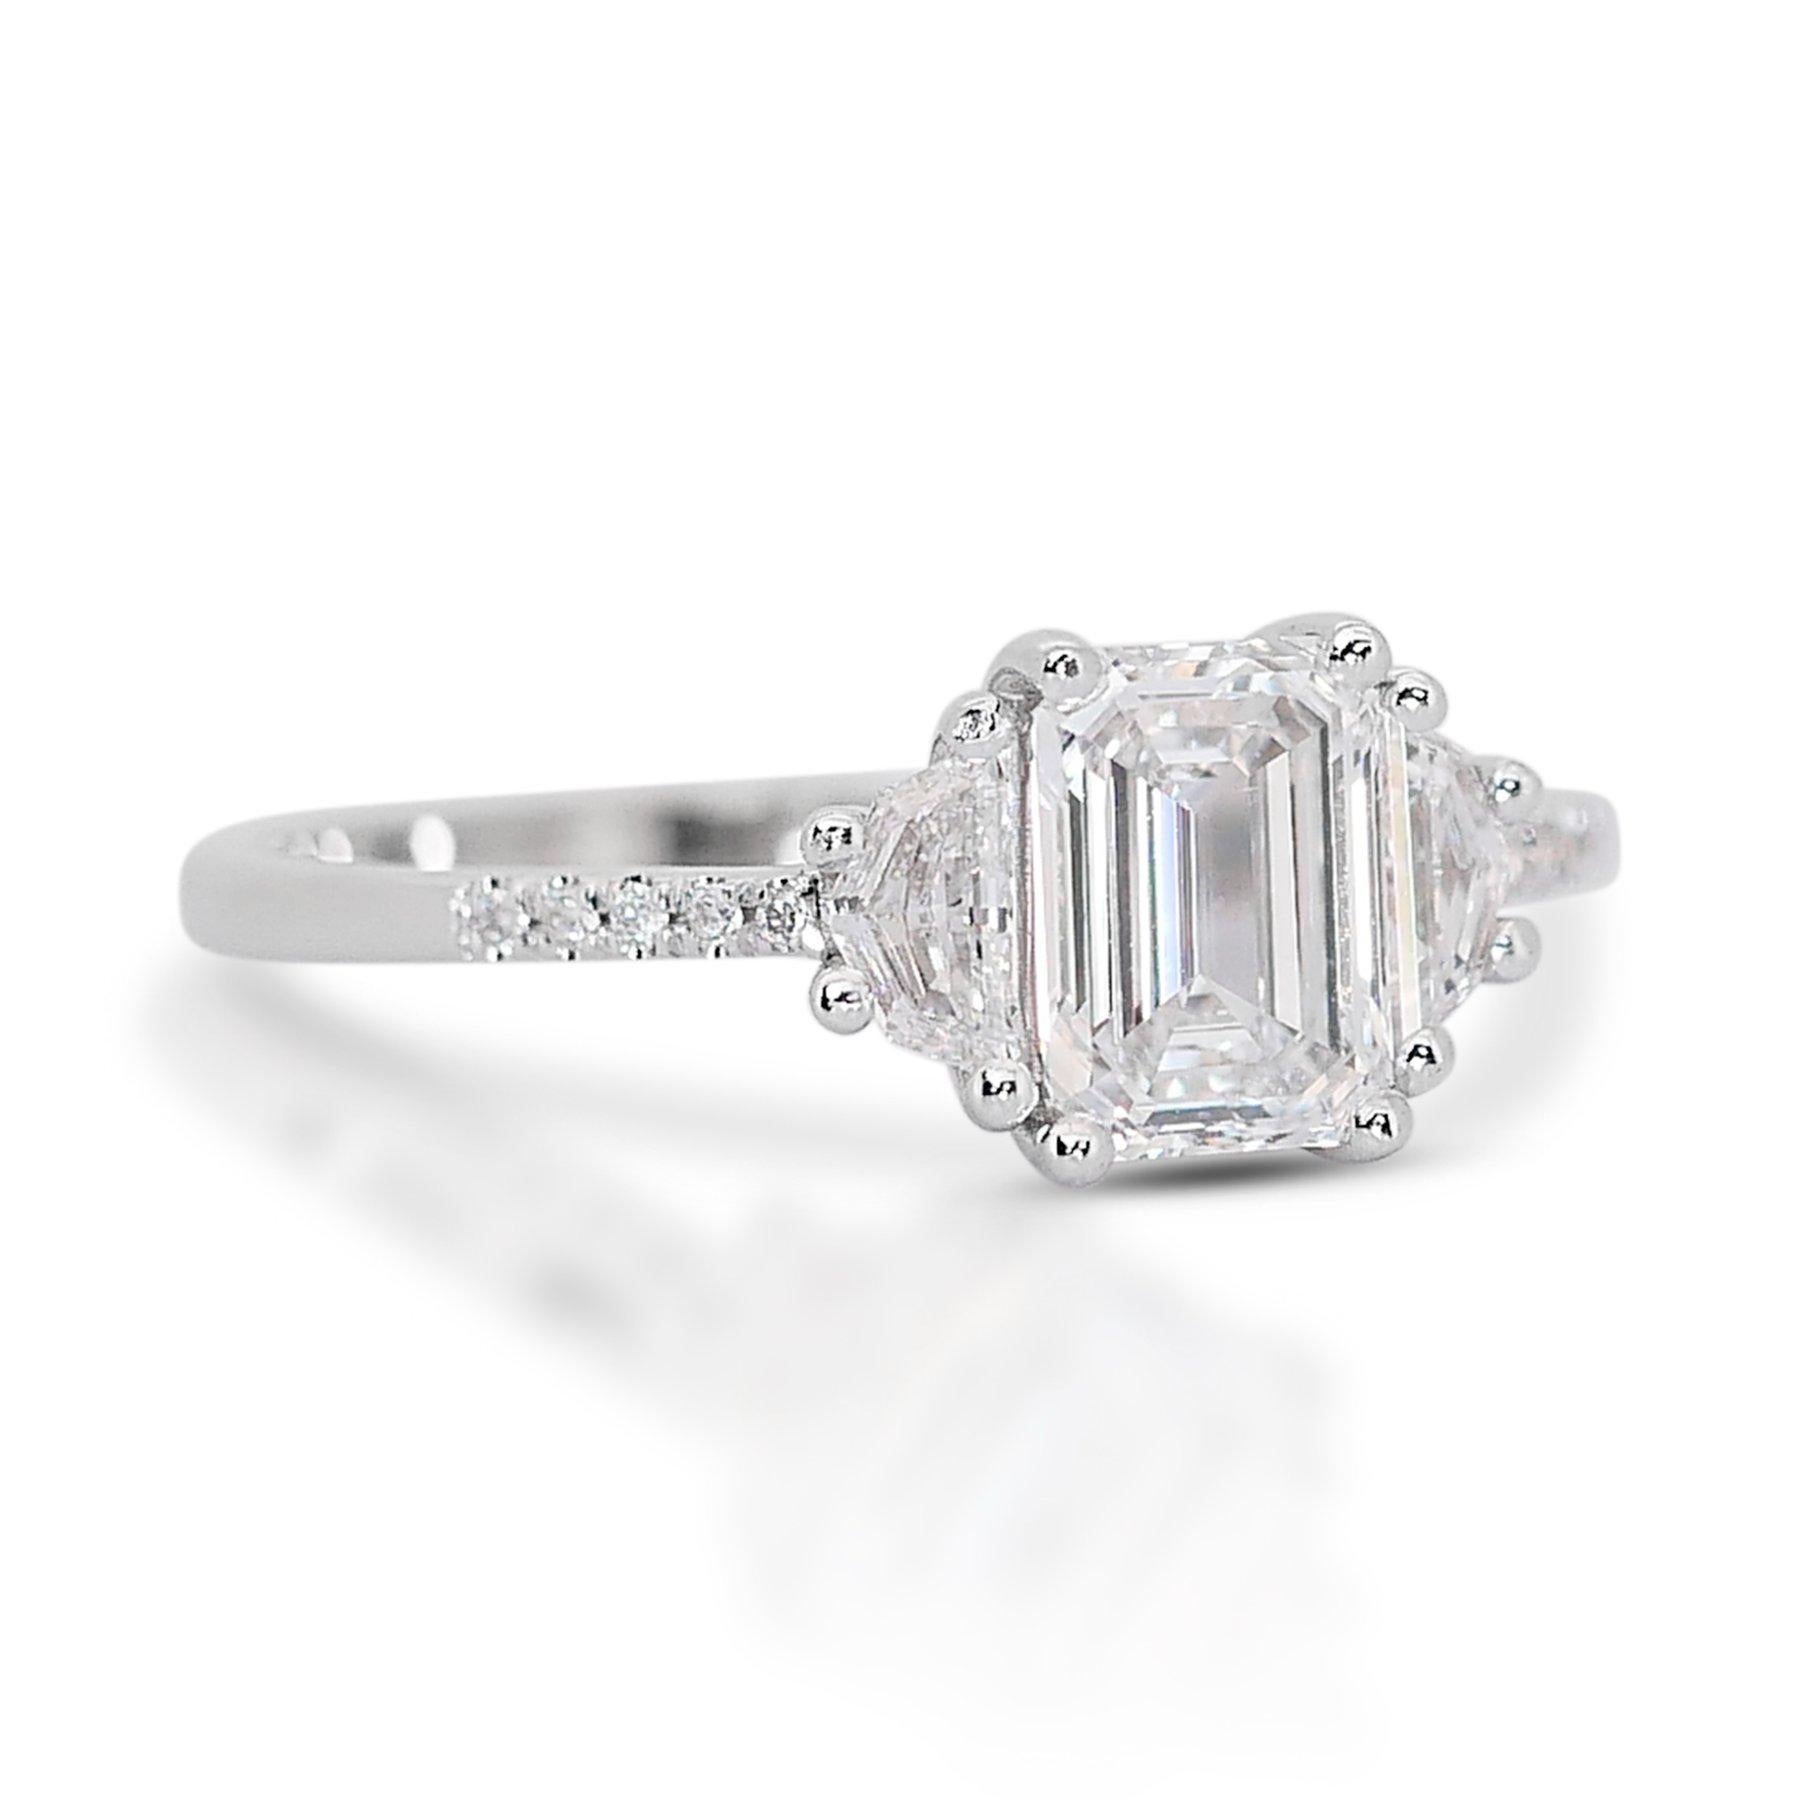 Emerald Cut Luxurious 1.20ct Diamond 3-Stone Ring in 18k White Gold - GIA Certified  For Sale